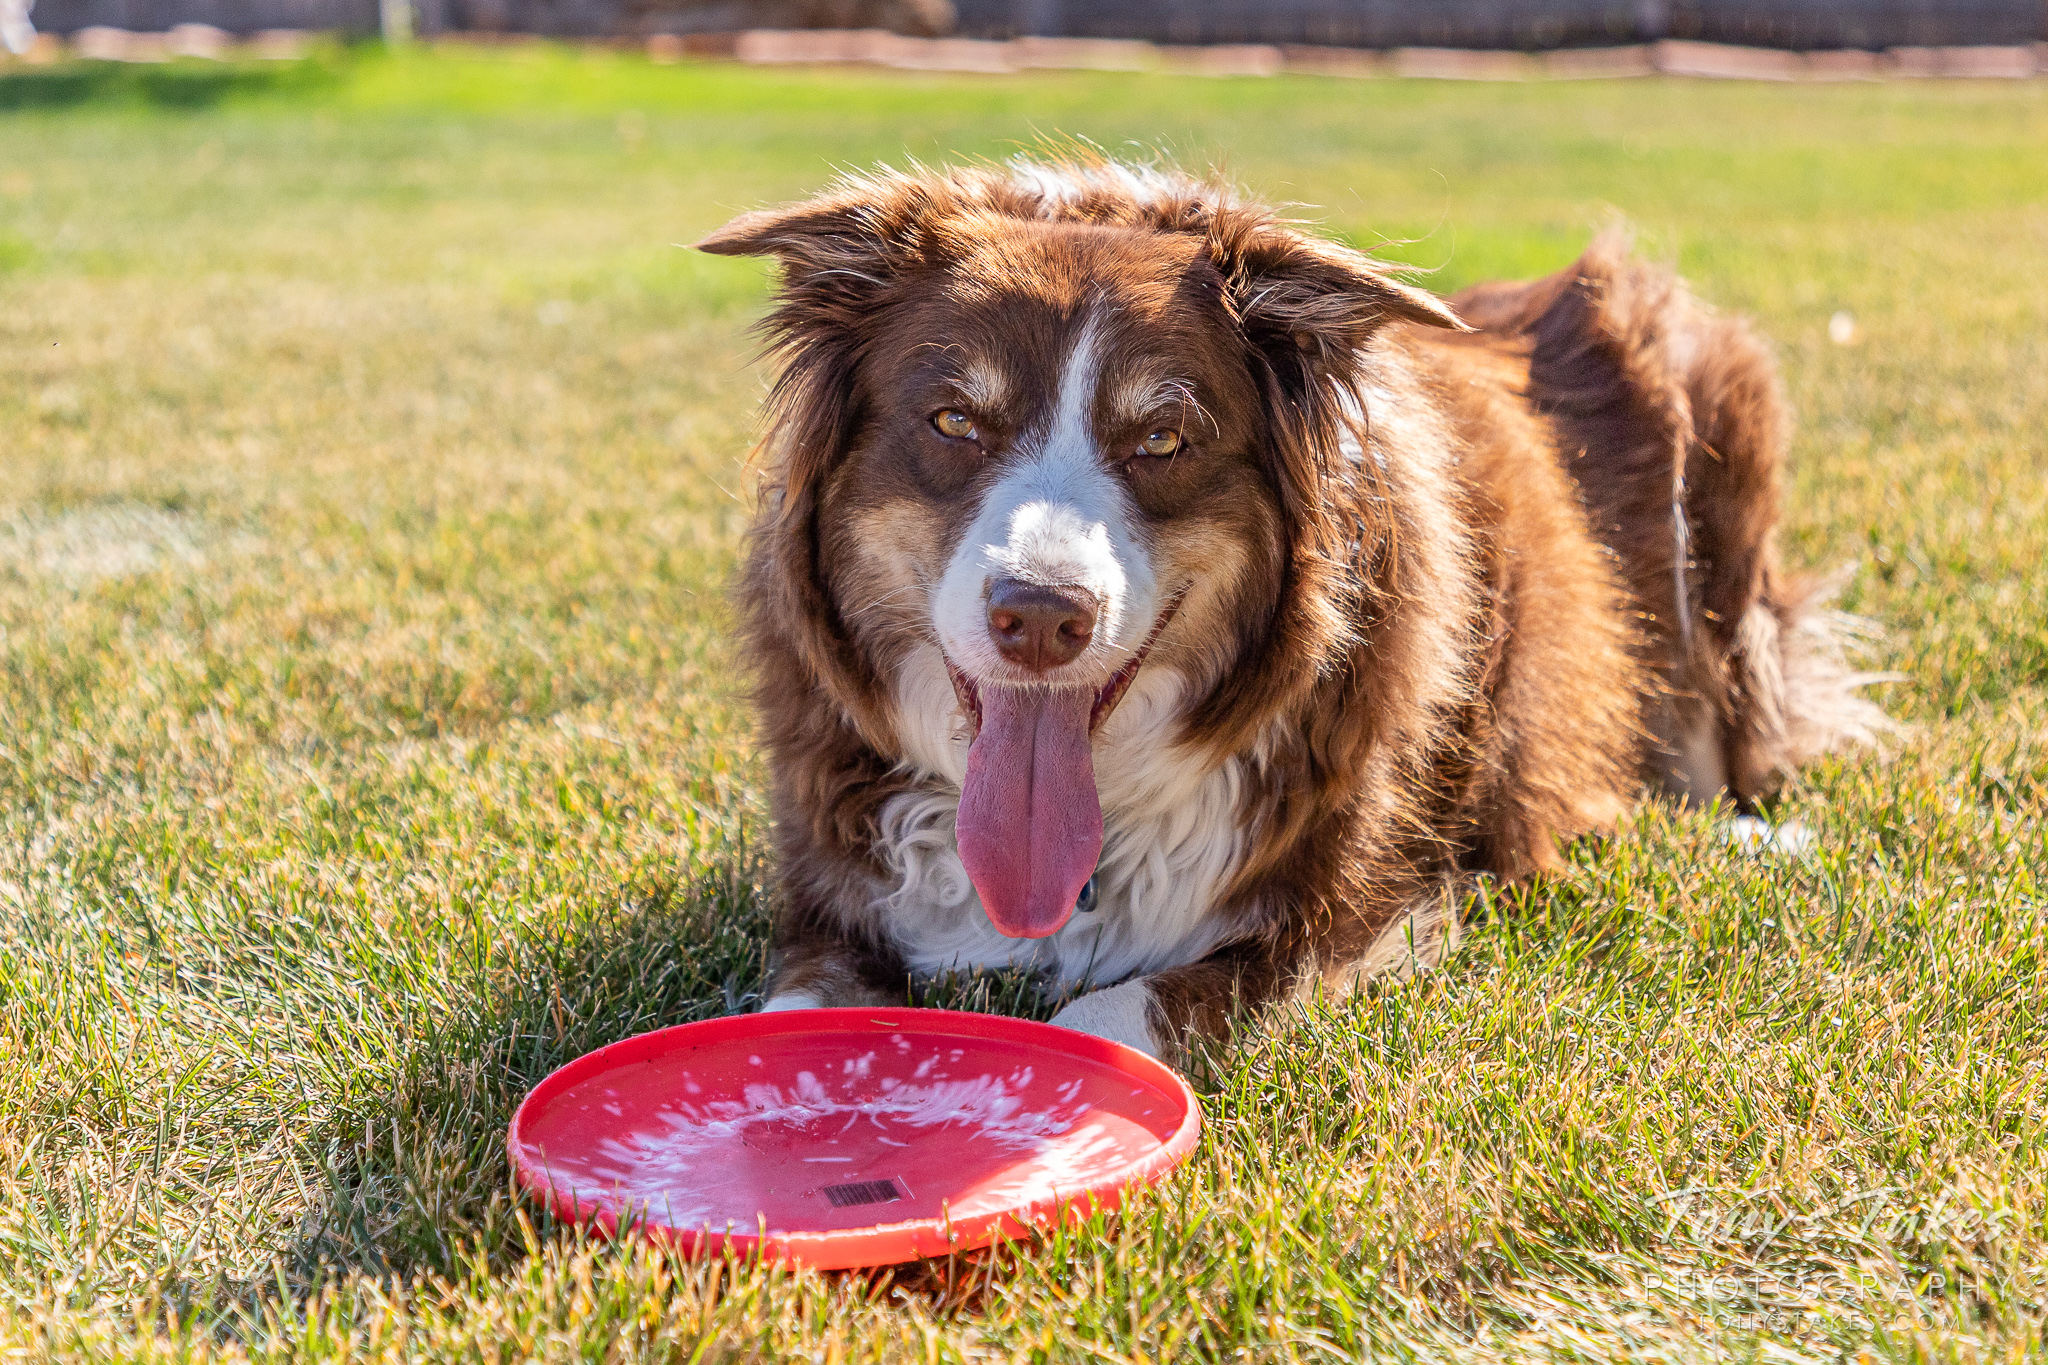 Scout, an 8-year-old border collie poses for pictures. (© Tony’s Takes)